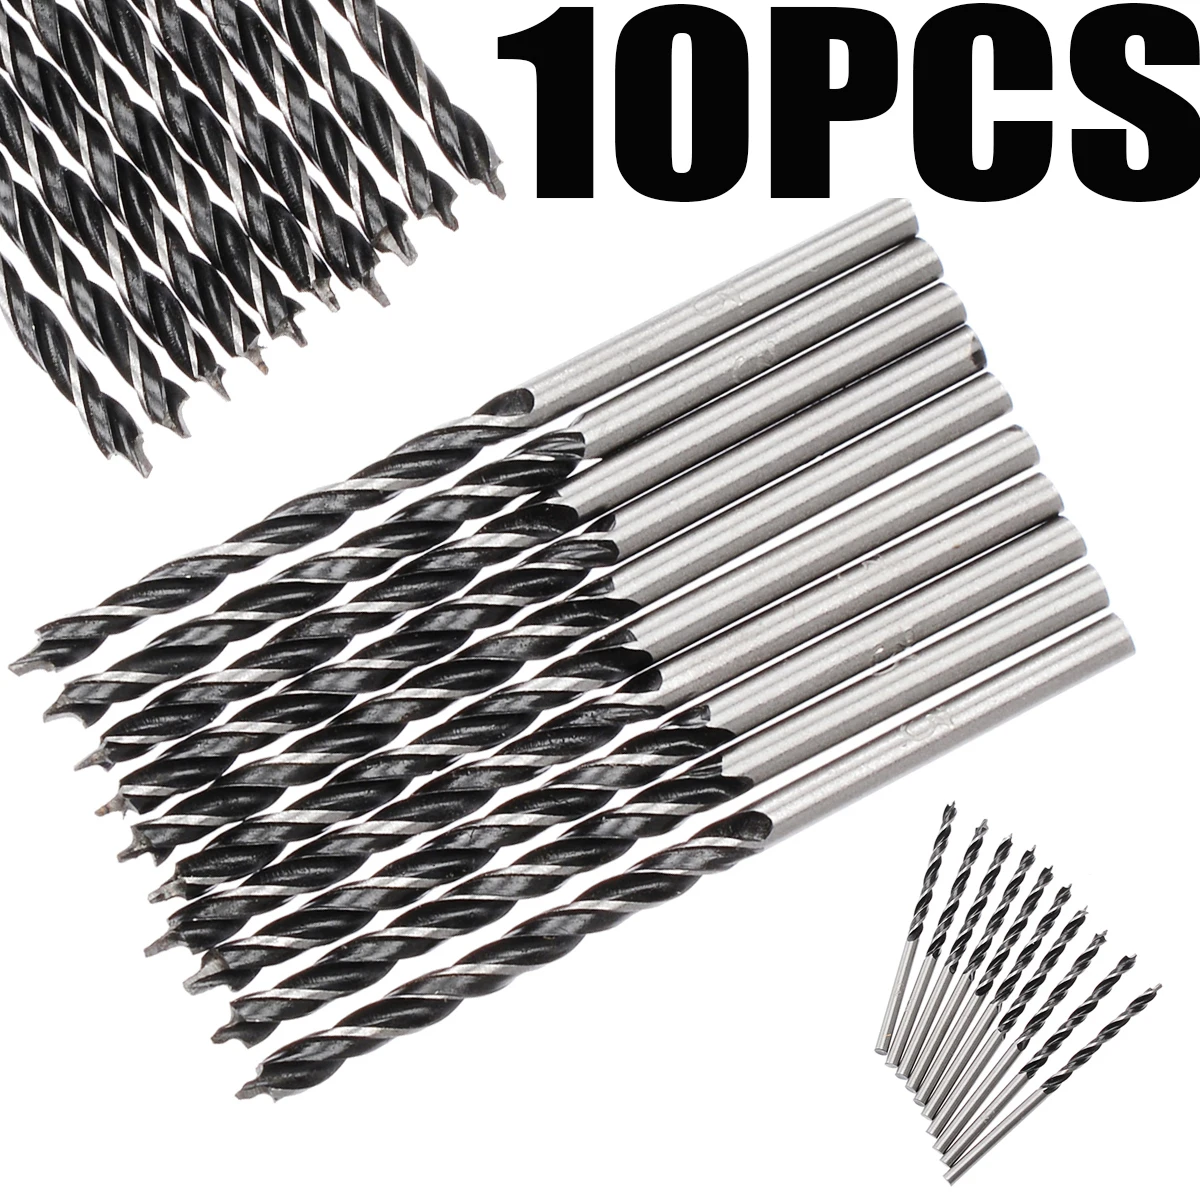 

10Pcs High Strength Woodworking Twist Drill Bit Wood Drills with Center Point 3mm Diameter For Woodworking